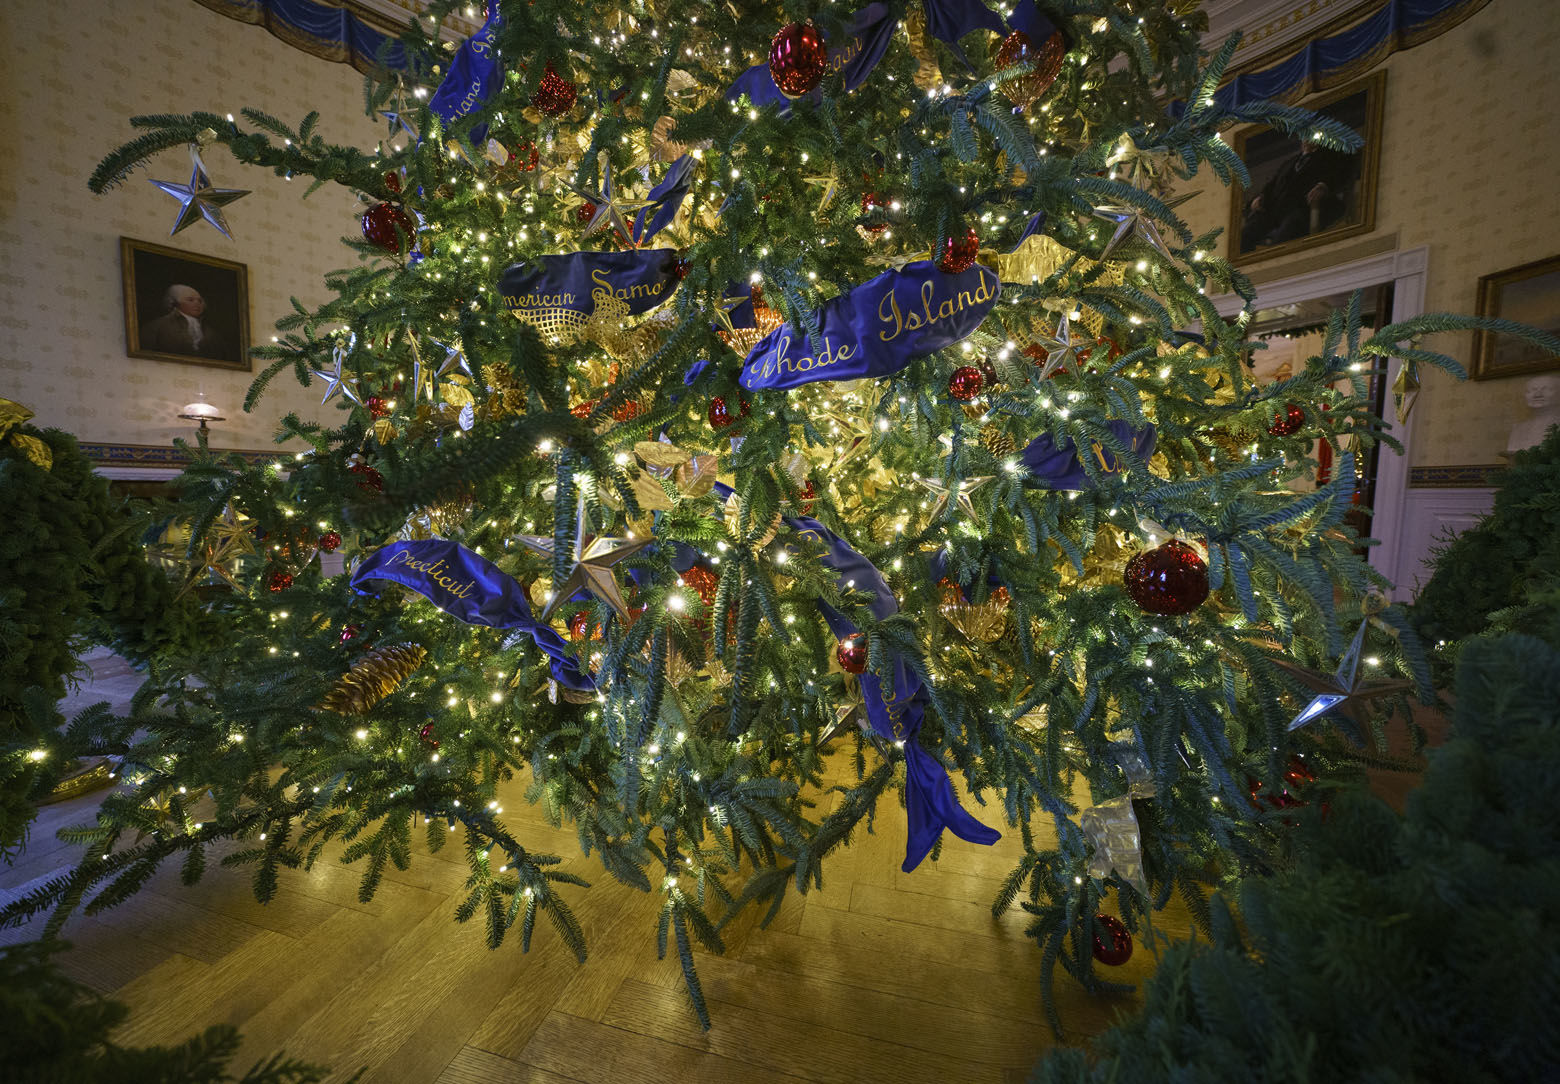 The base of the official White House Christmas tree is seen in the Blue Room during the 2018 Christmas Press Preview at the White House in Washington, Monday, Nov. 26, 2018. The tree measures 18 feet tall and is dressed in over 500 feet of blue velvet ribbon embroidered in gold with each State and territory. Christmas has arrived at the White House. First lady Melania Trump unveiled the 2018 White House holiday decor on Monday. She designed the decor, which features a theme of "American Treasures." (AP Photo/Carolyn Kaster)